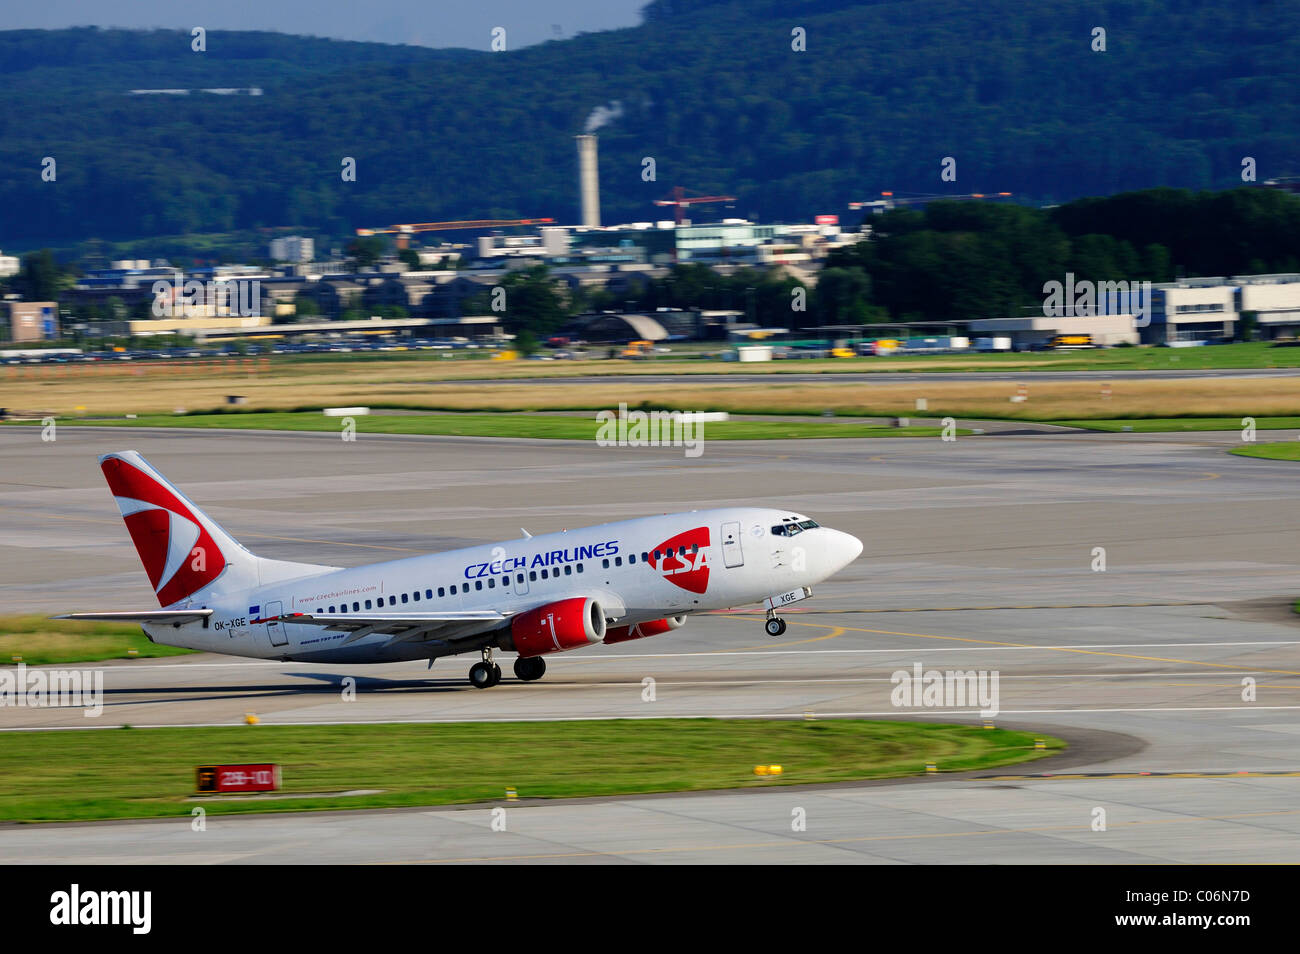 Boeing 737-500 from Czech Airlines during take-off, Zurich Airport,  Switzerland, Europe Stock Photo - Alamy